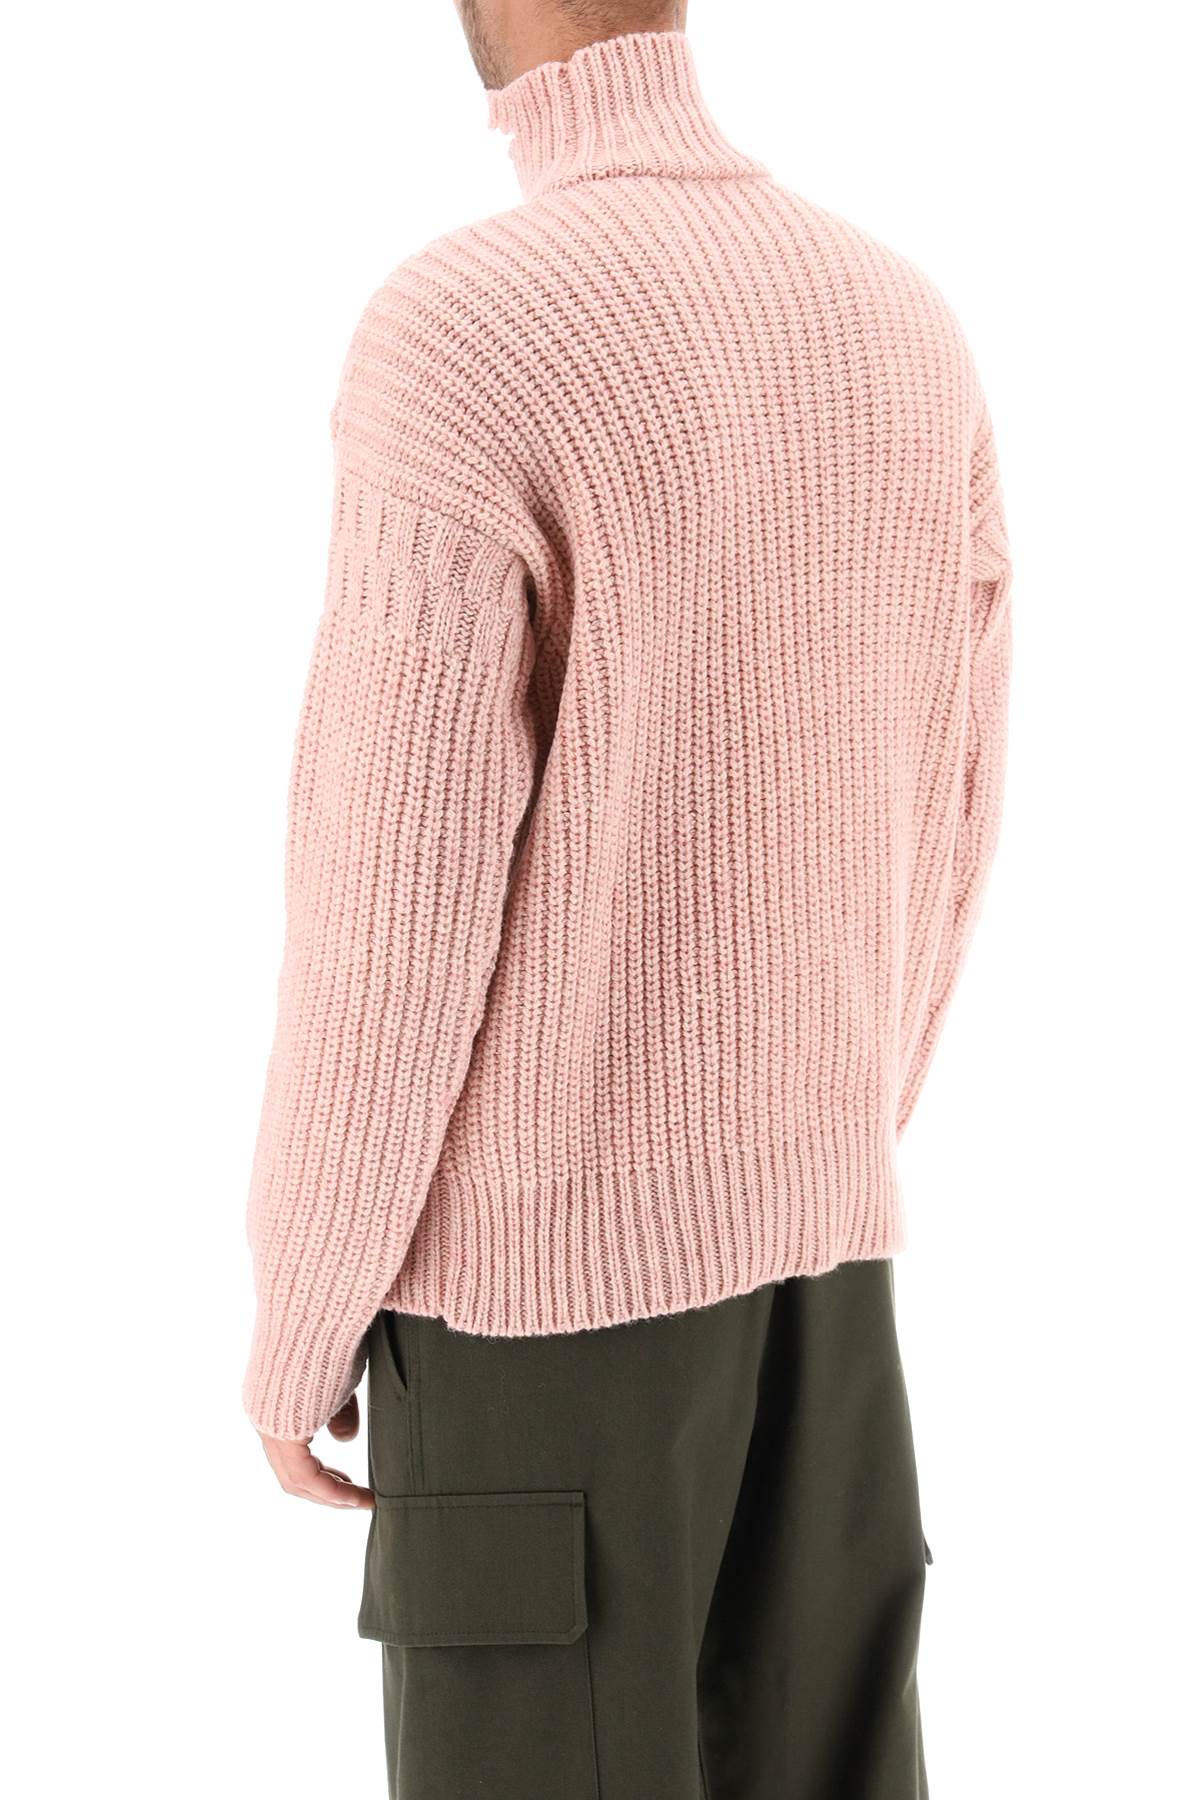 Marni funnel-neck sweater in destroyed-effect wool-2